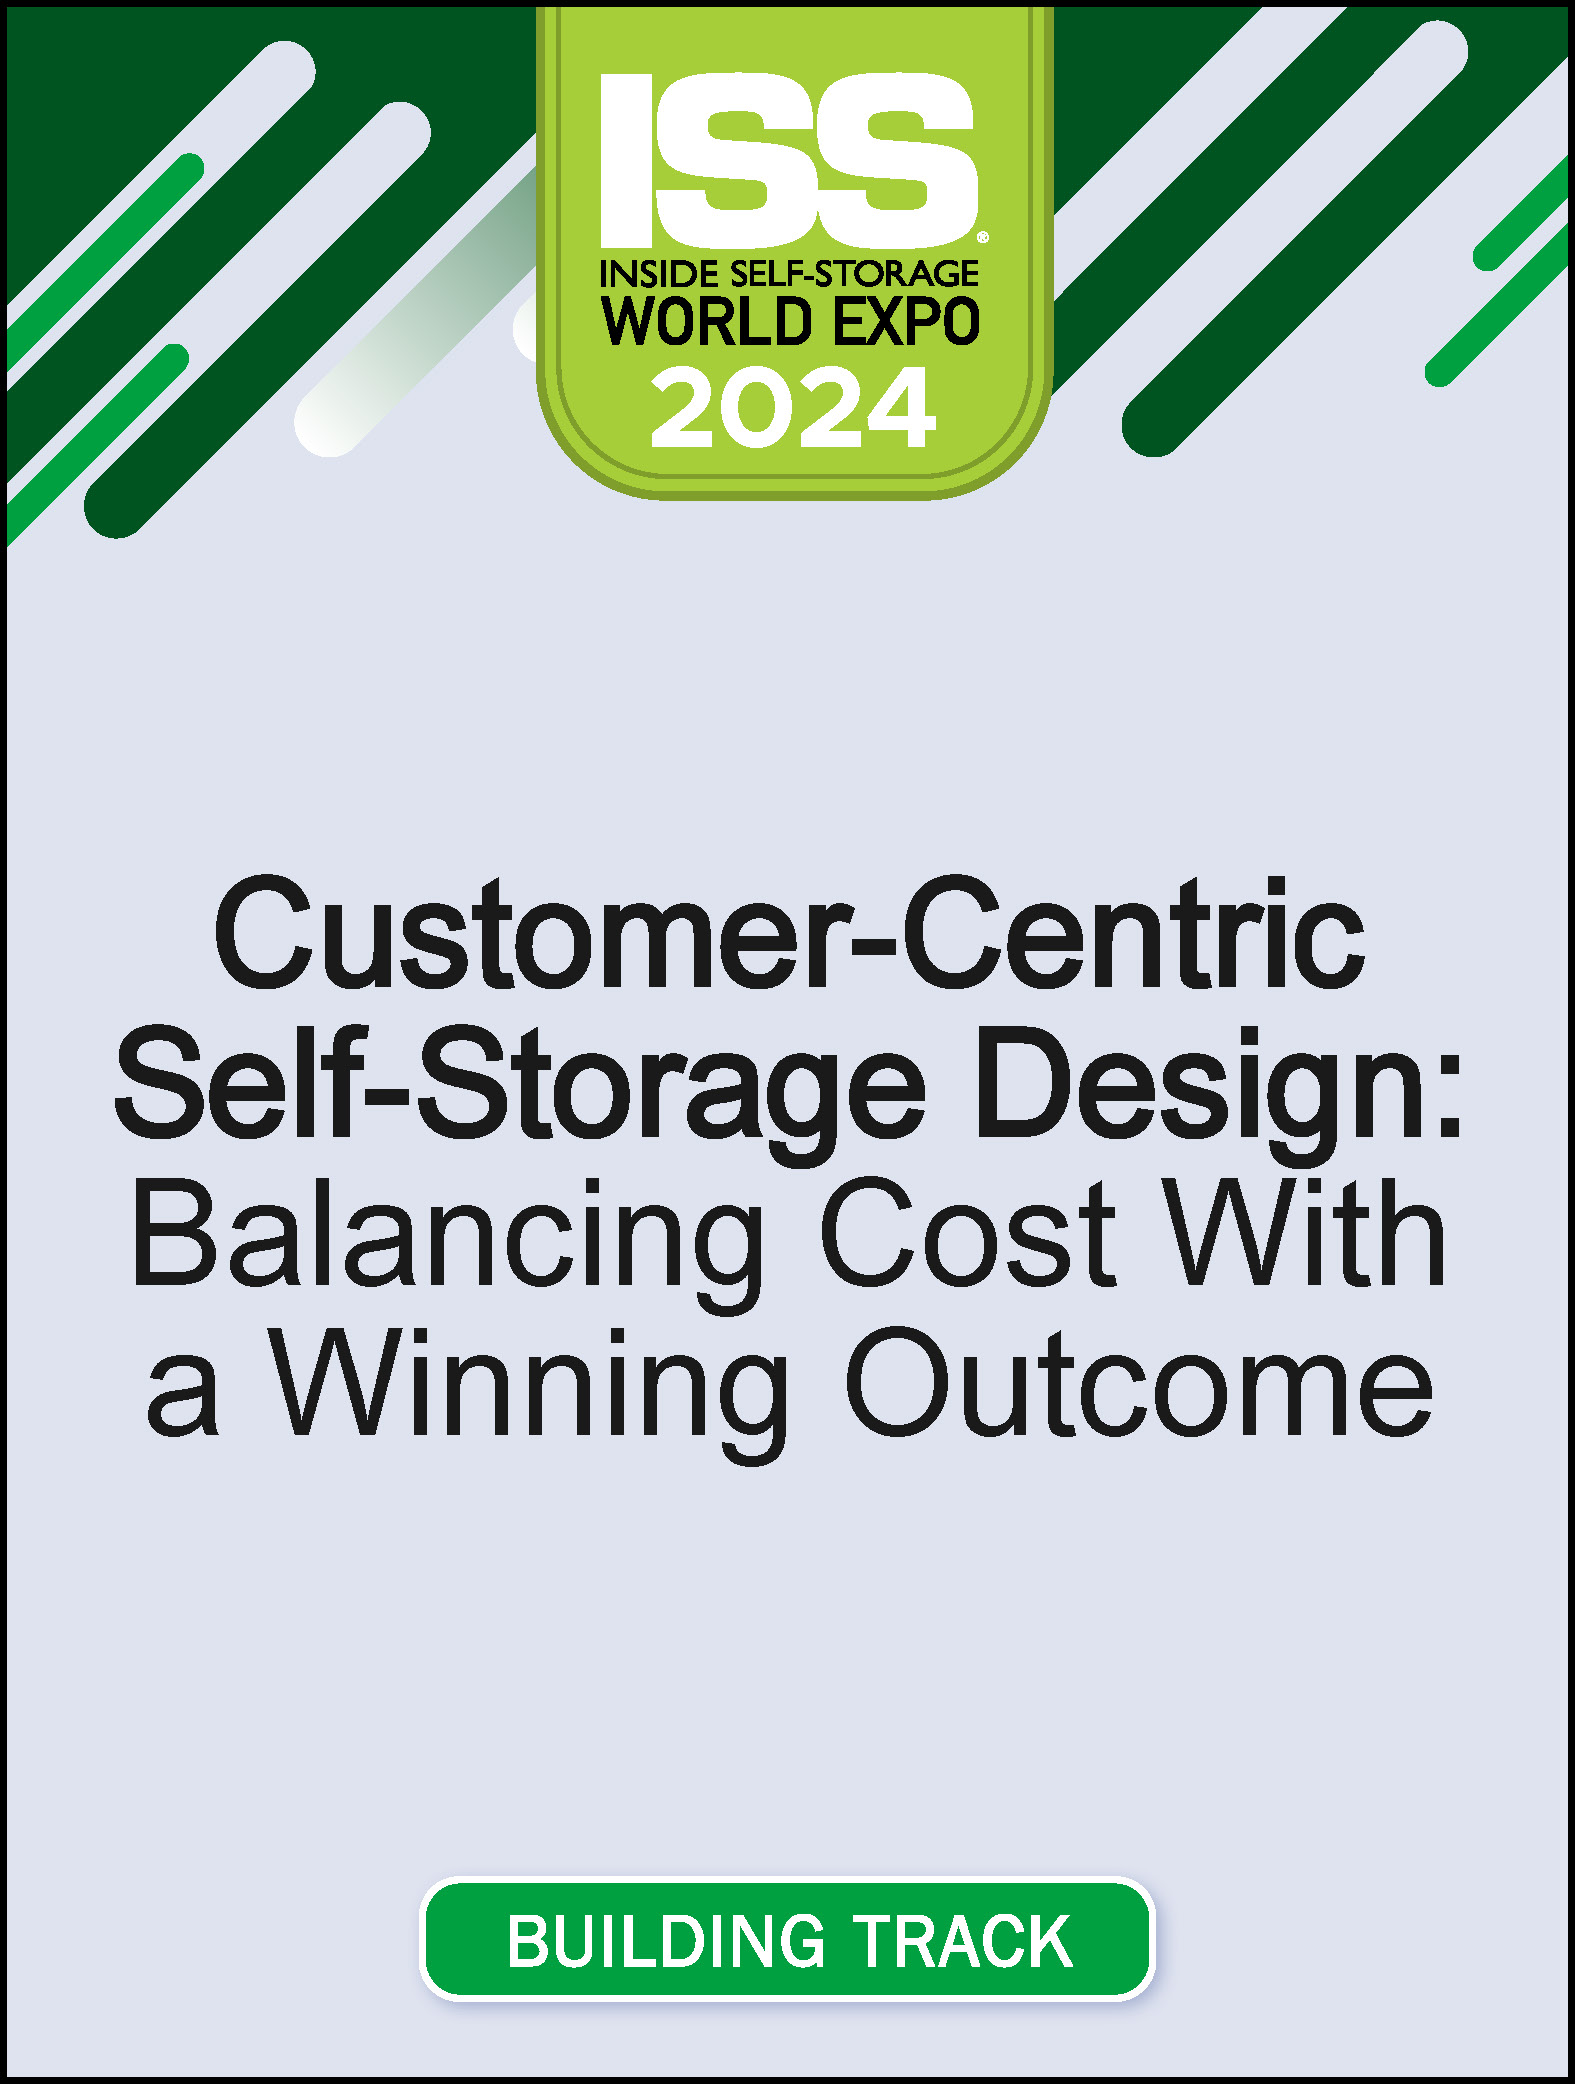 Video Pre-Order PDF - Customer-Centric Self-Storage Design: Balancing Cost With a Winning Outcome